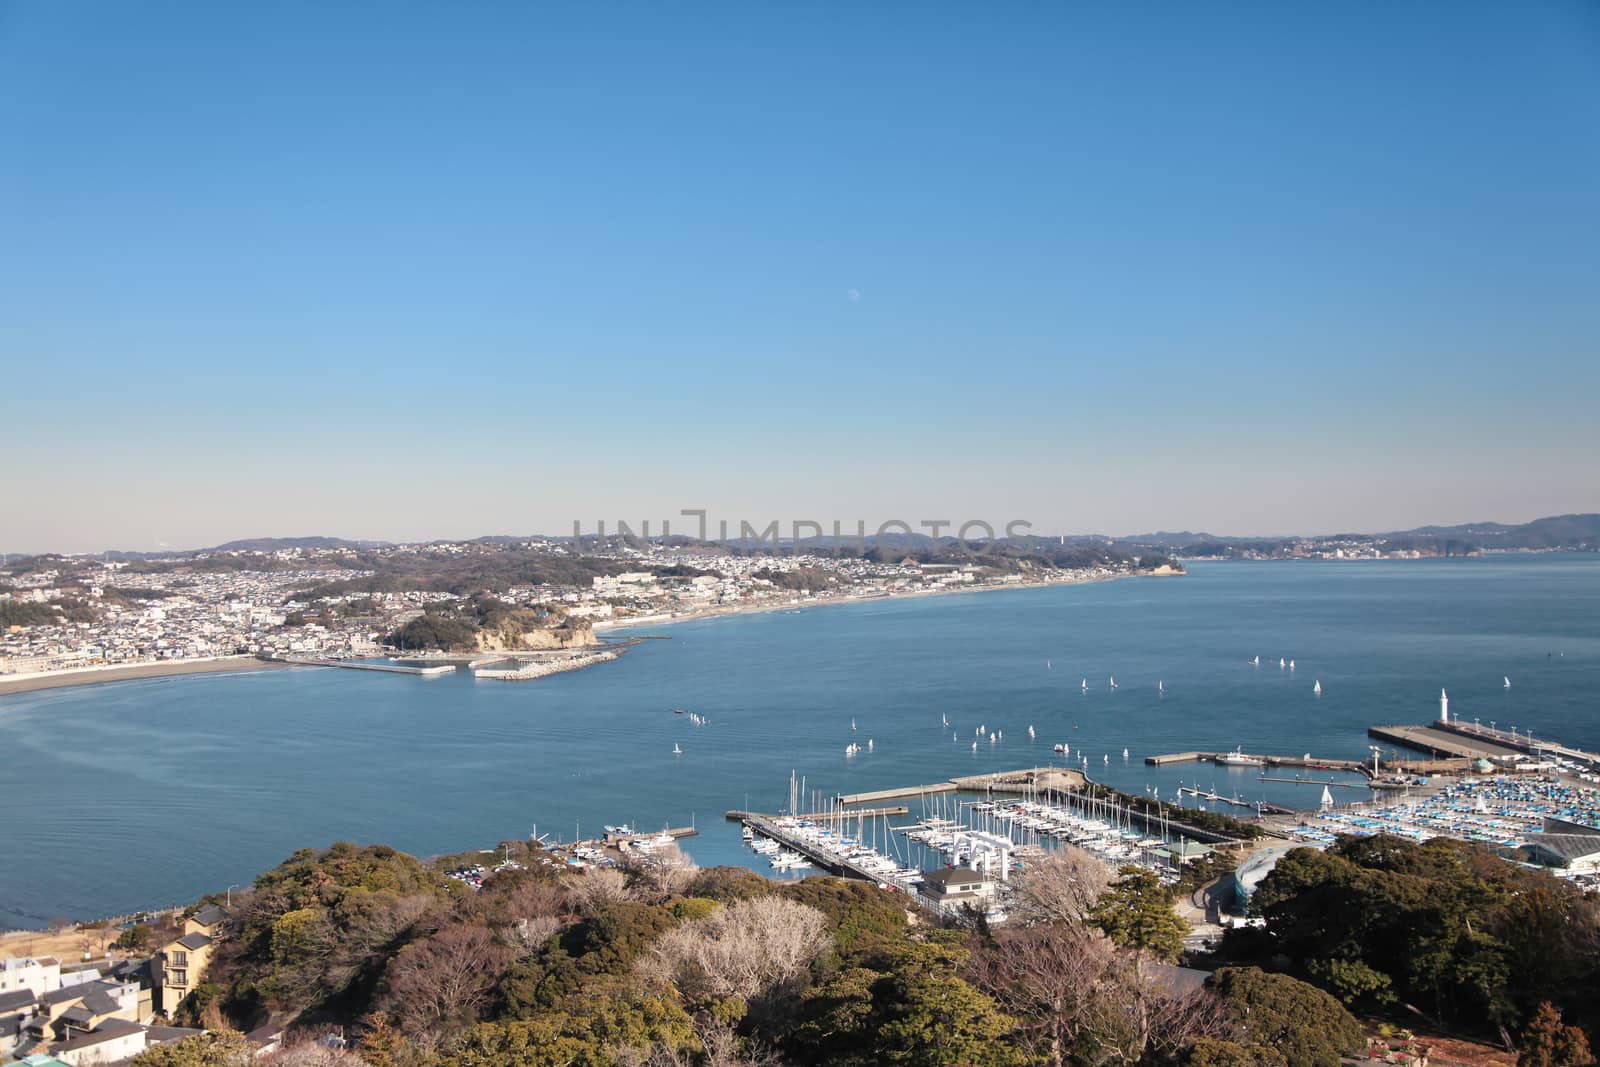 Bayside view of Tokyo Japan, with clear blue sky